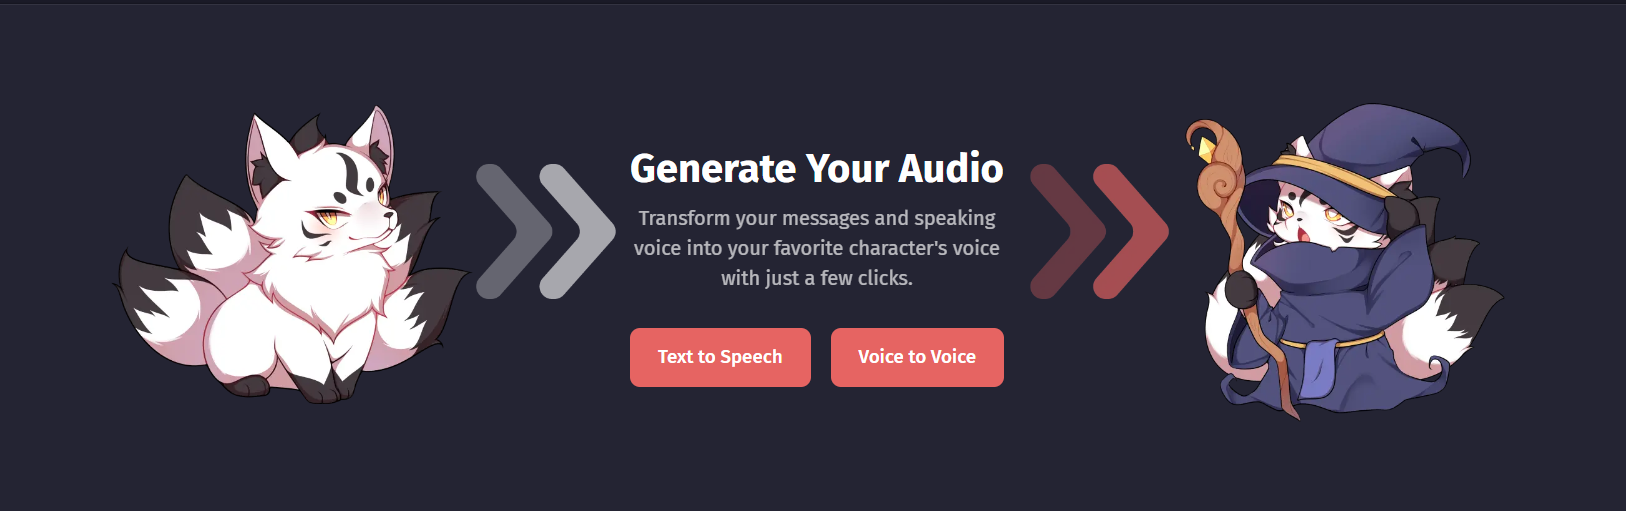 Using FakeYou text-to-speech or voice-to-voice technology.